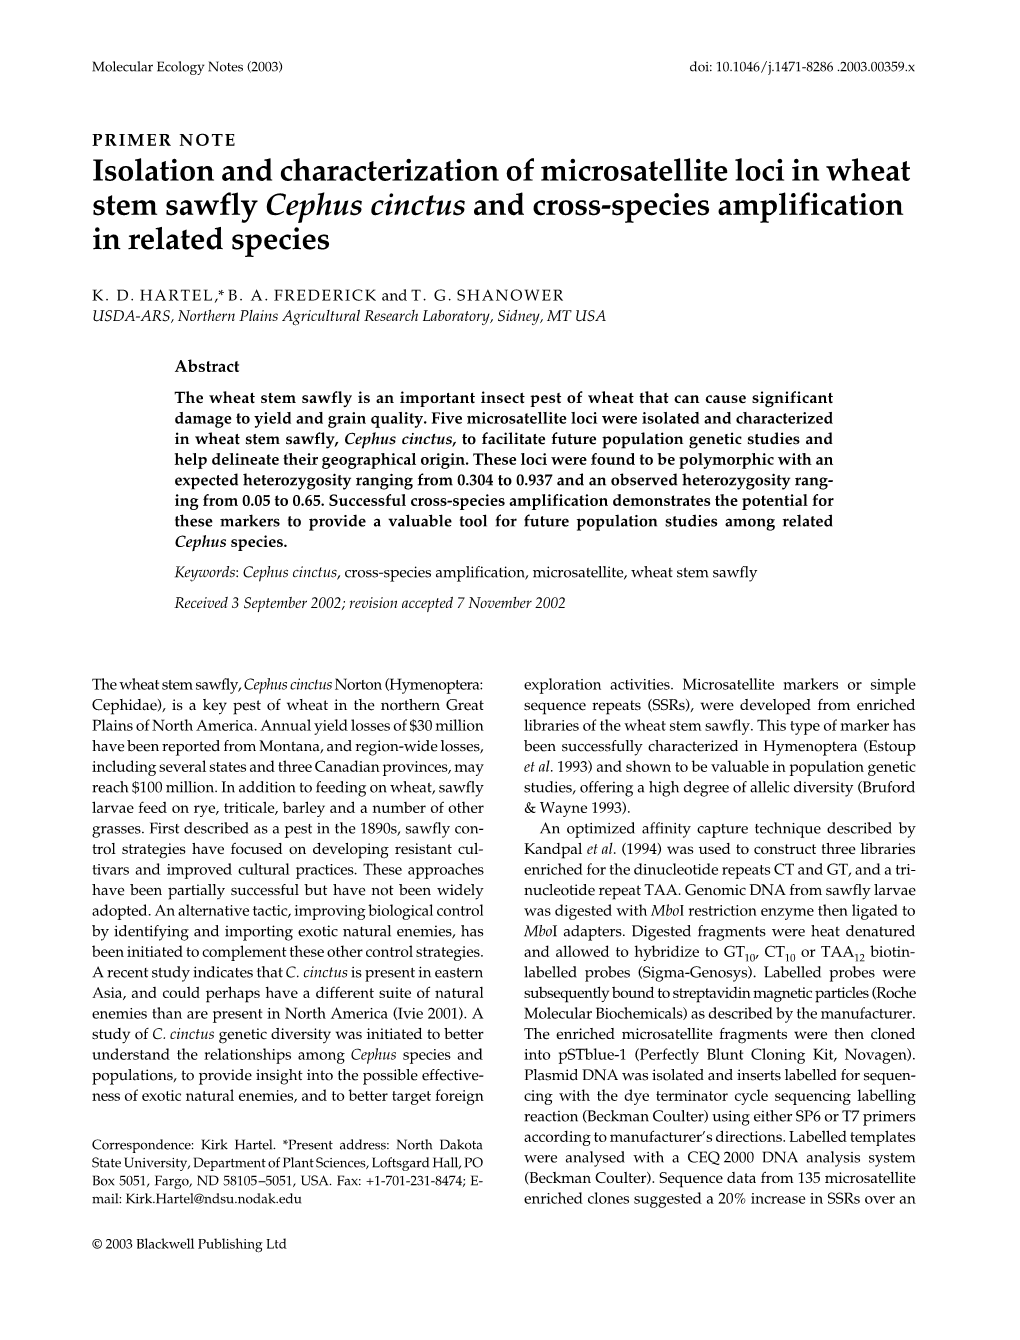 Isolation and Characterization of Microsatellite Loci in Wheat Stem Sawfly Cephus Cinctus and Cross-Species Amplification in Related Species